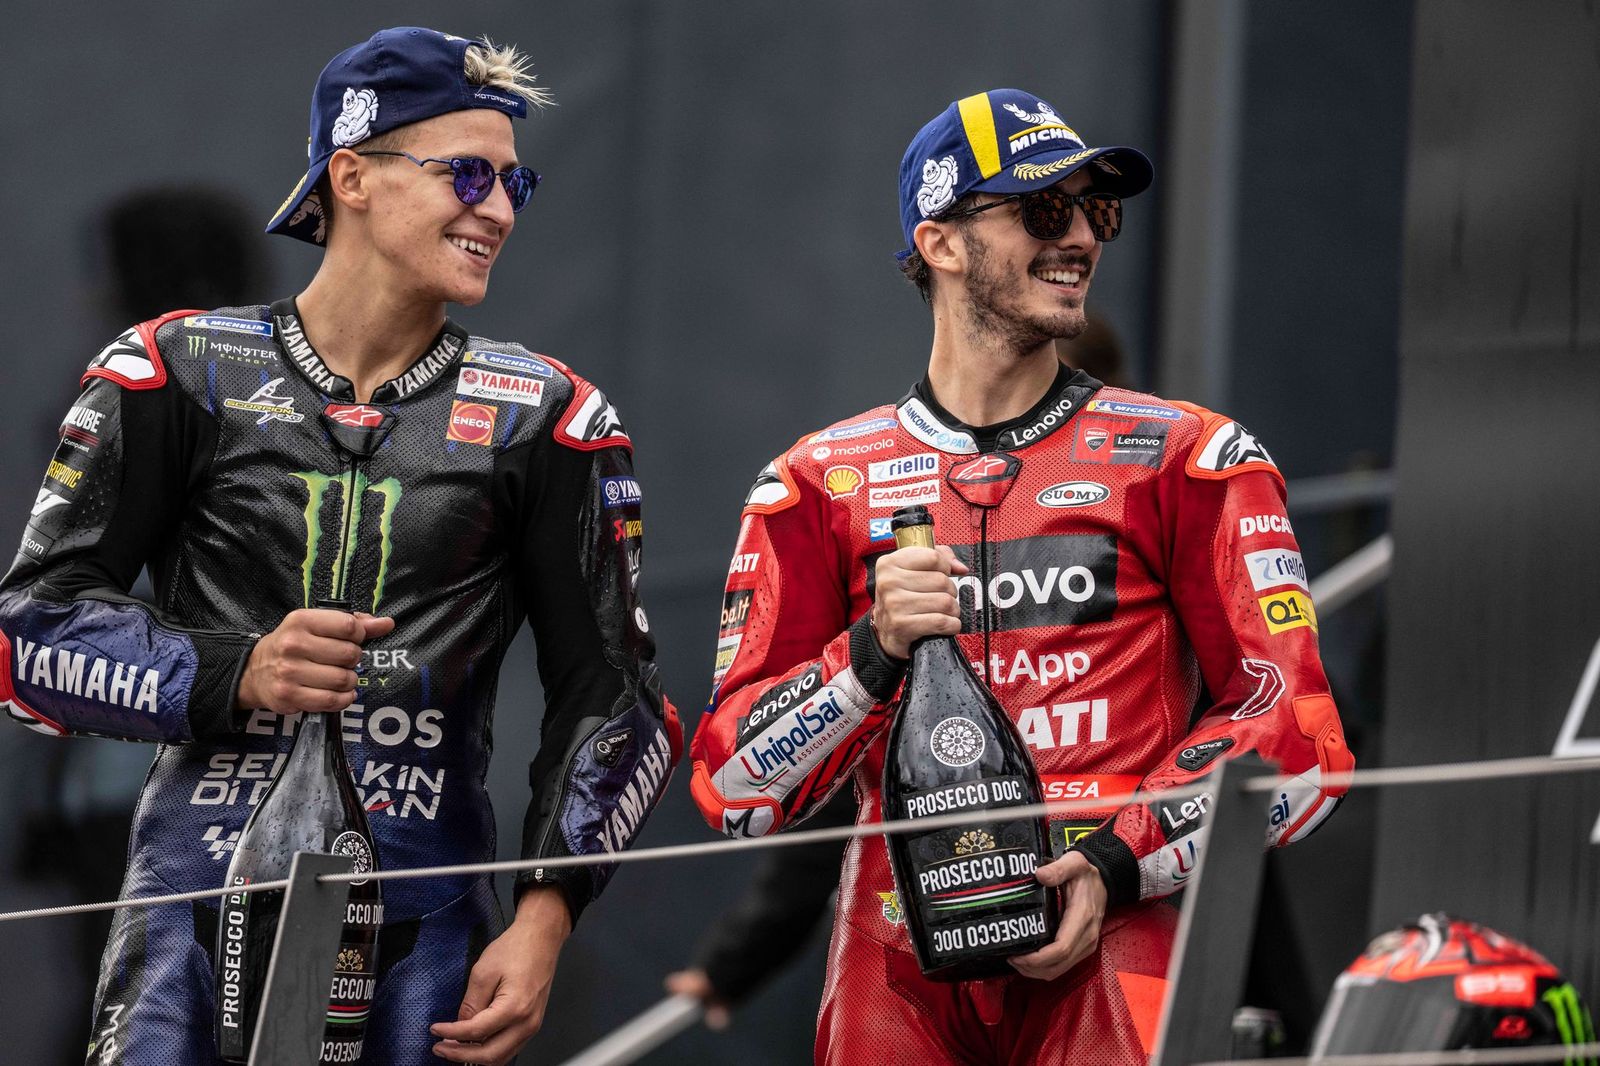 PECCO BAGNAIA MAKES IT A HAT-TRICK OF MOTOGP WINS AS FABIO QUARTARARO STORMS TO SECOND PLACE IN ALPINESTARS 1-2 FINISH AT THE RED BULL RING, AUSTRIA